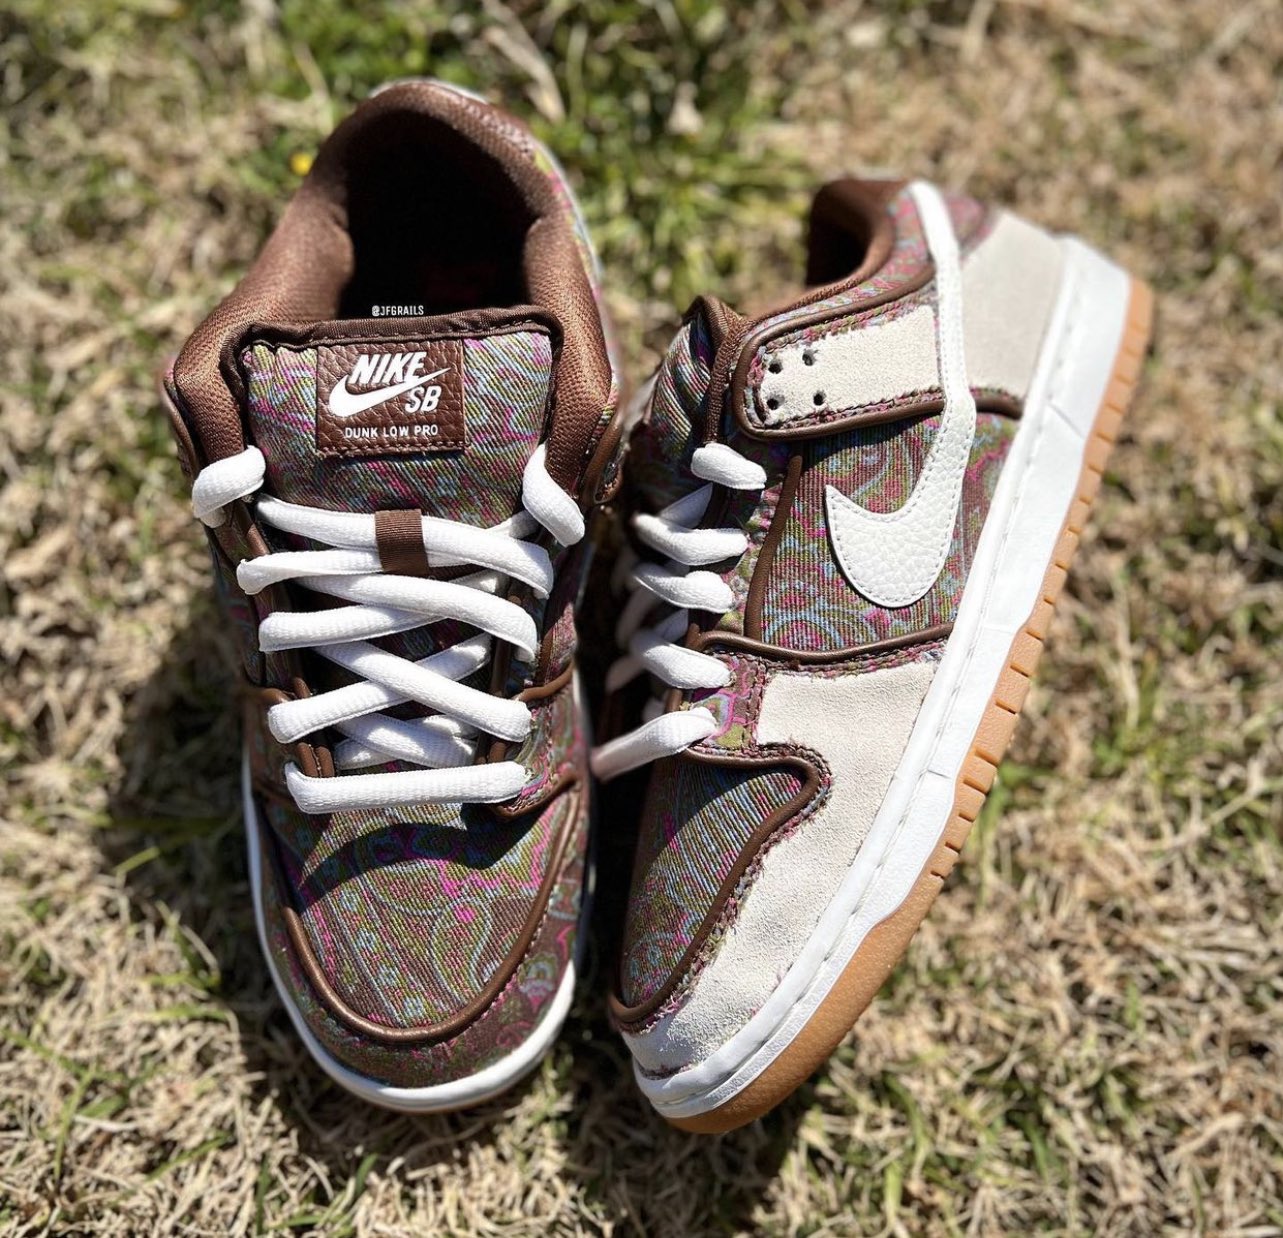 Nike SB Dunk Low "Brown Paisley" DH7534-200 Release Date